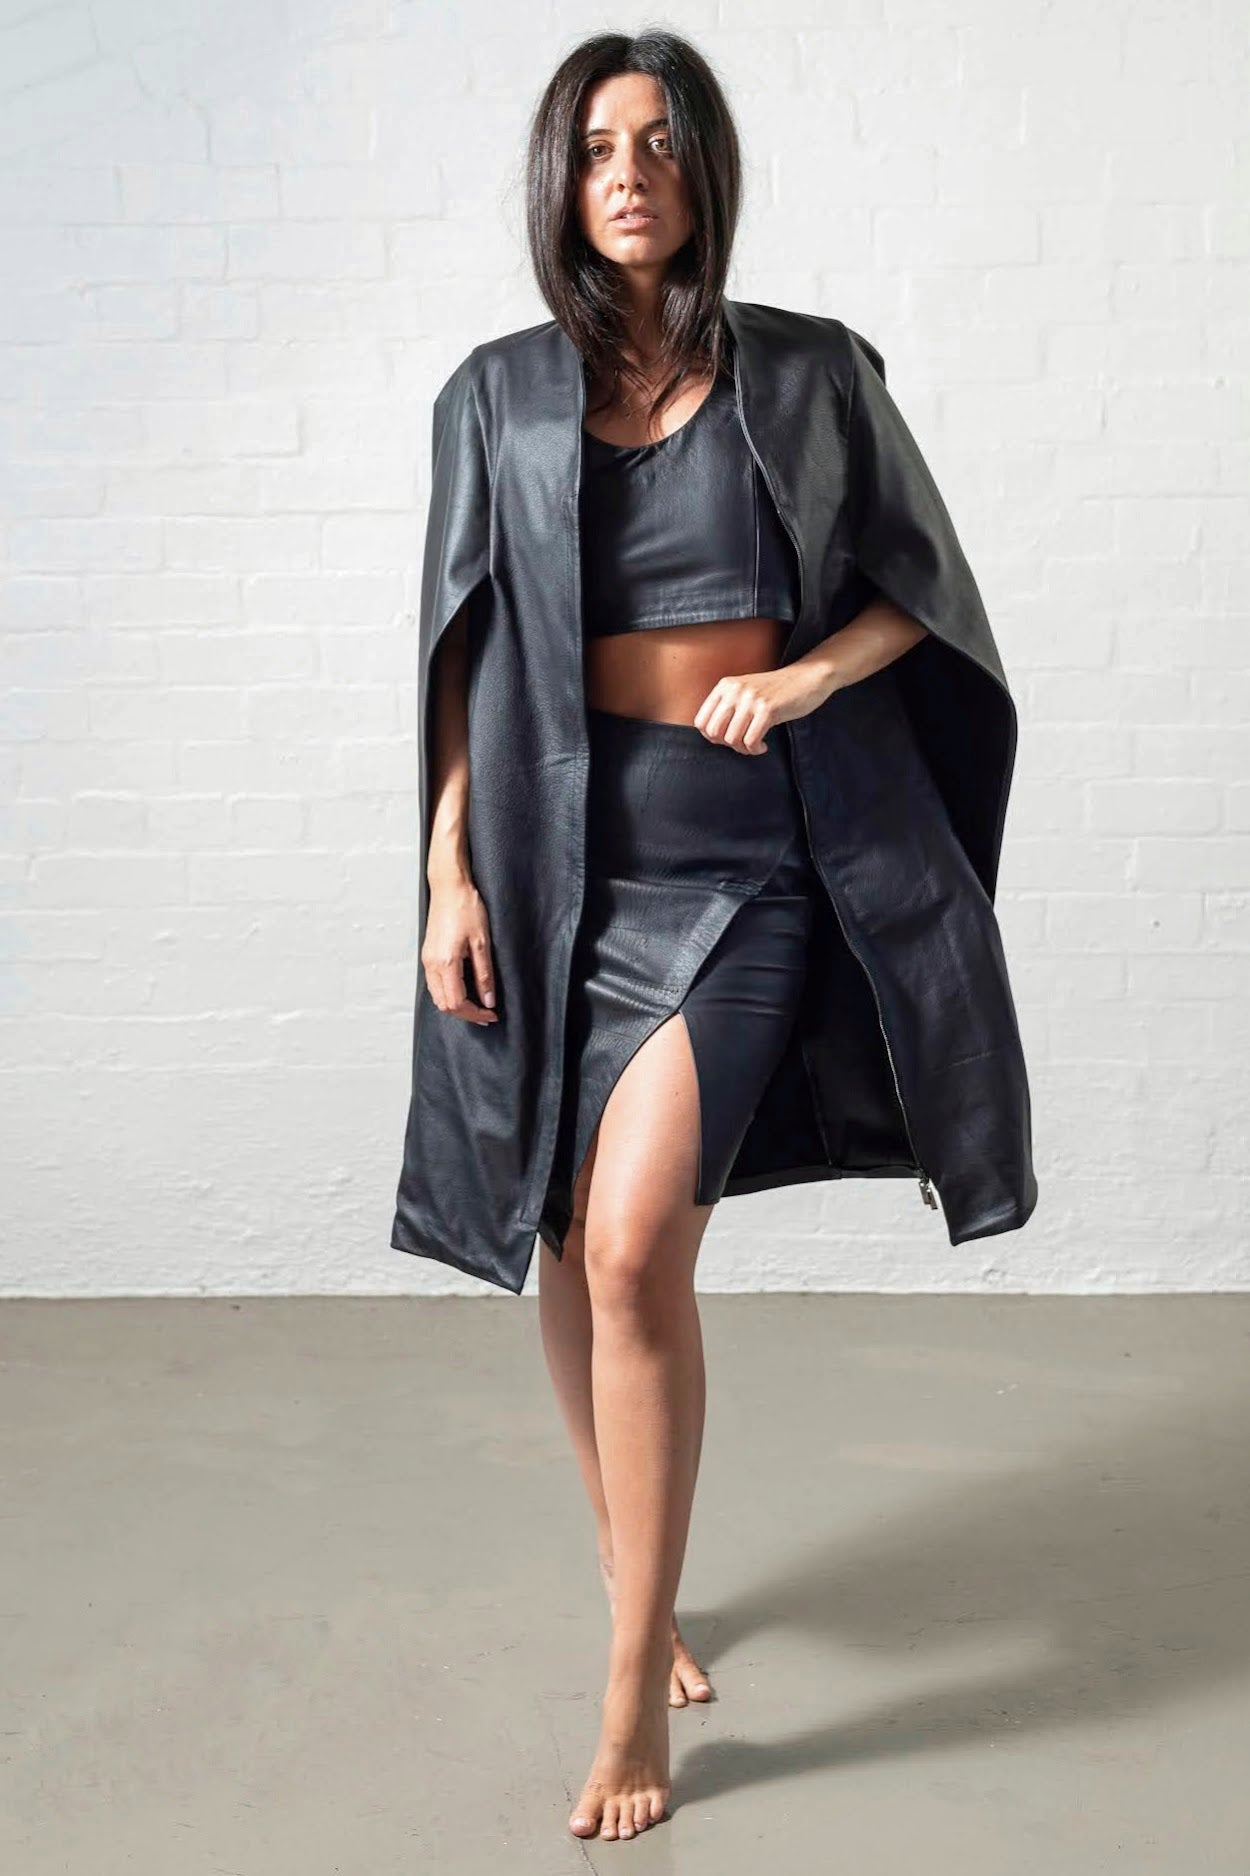 Leather asymmetrical skirt worn with vest and cape